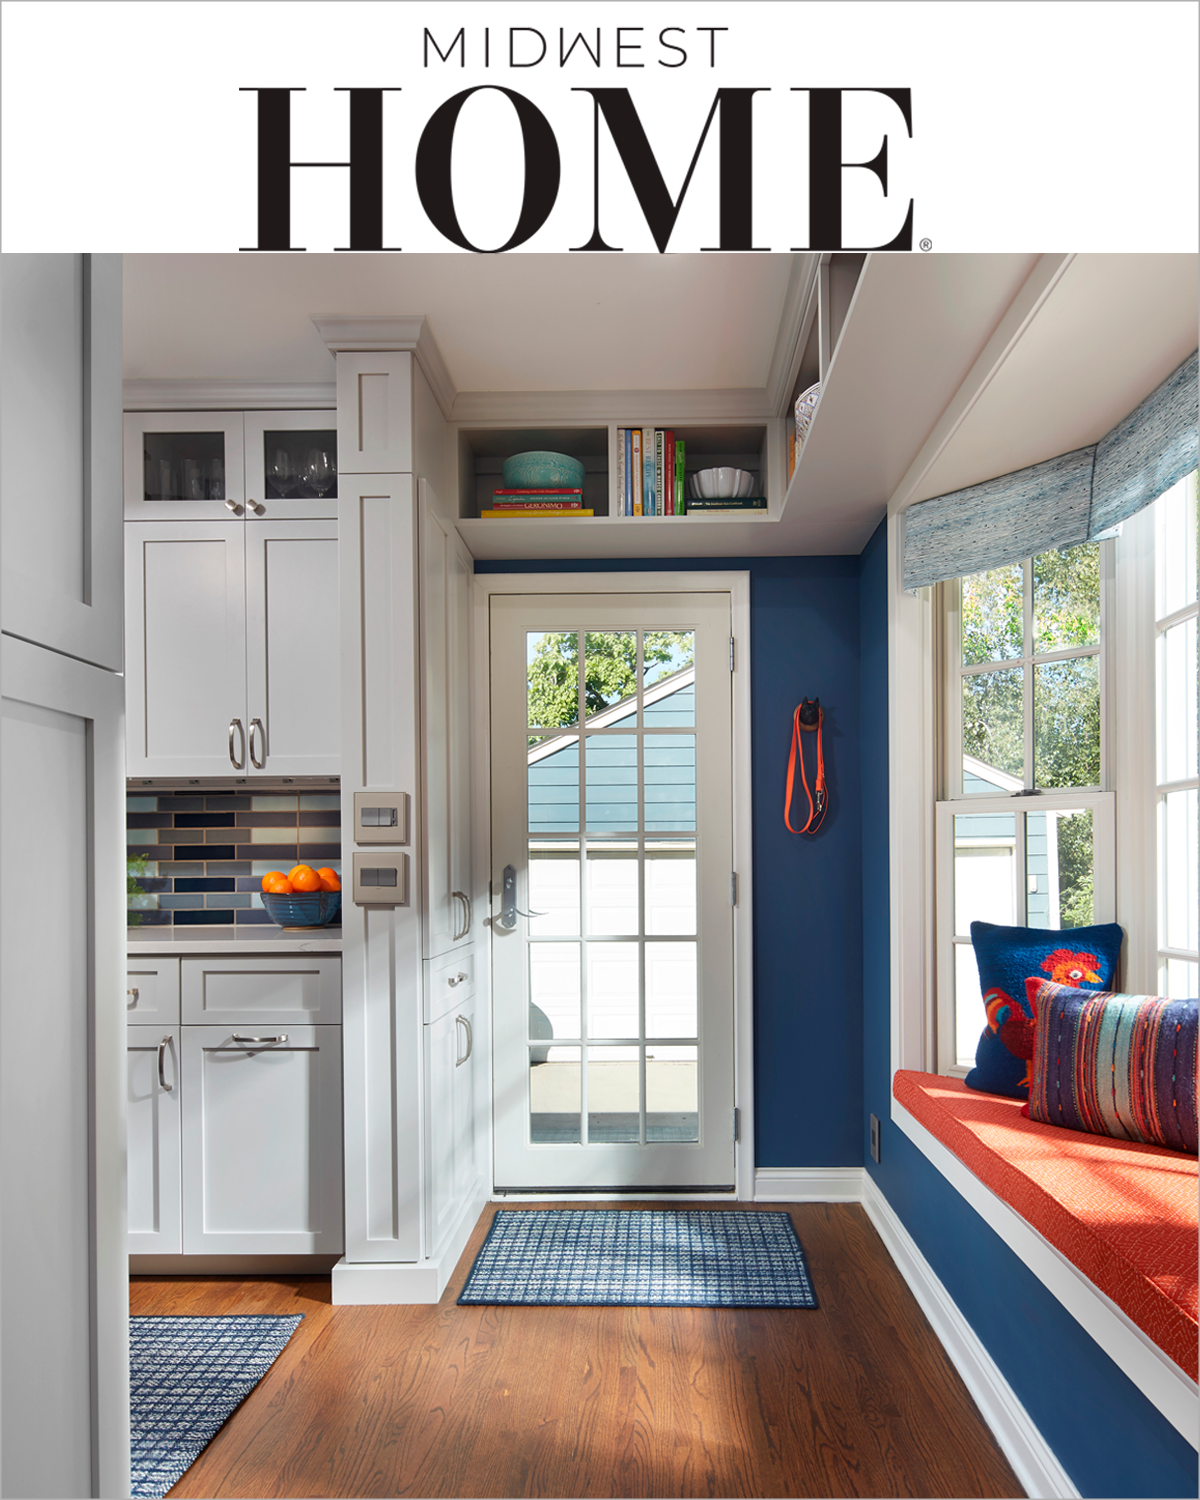 LiLu Interiors featured in Midwest Home magazine 2018 – A bungalow kitchen gets an in-character update